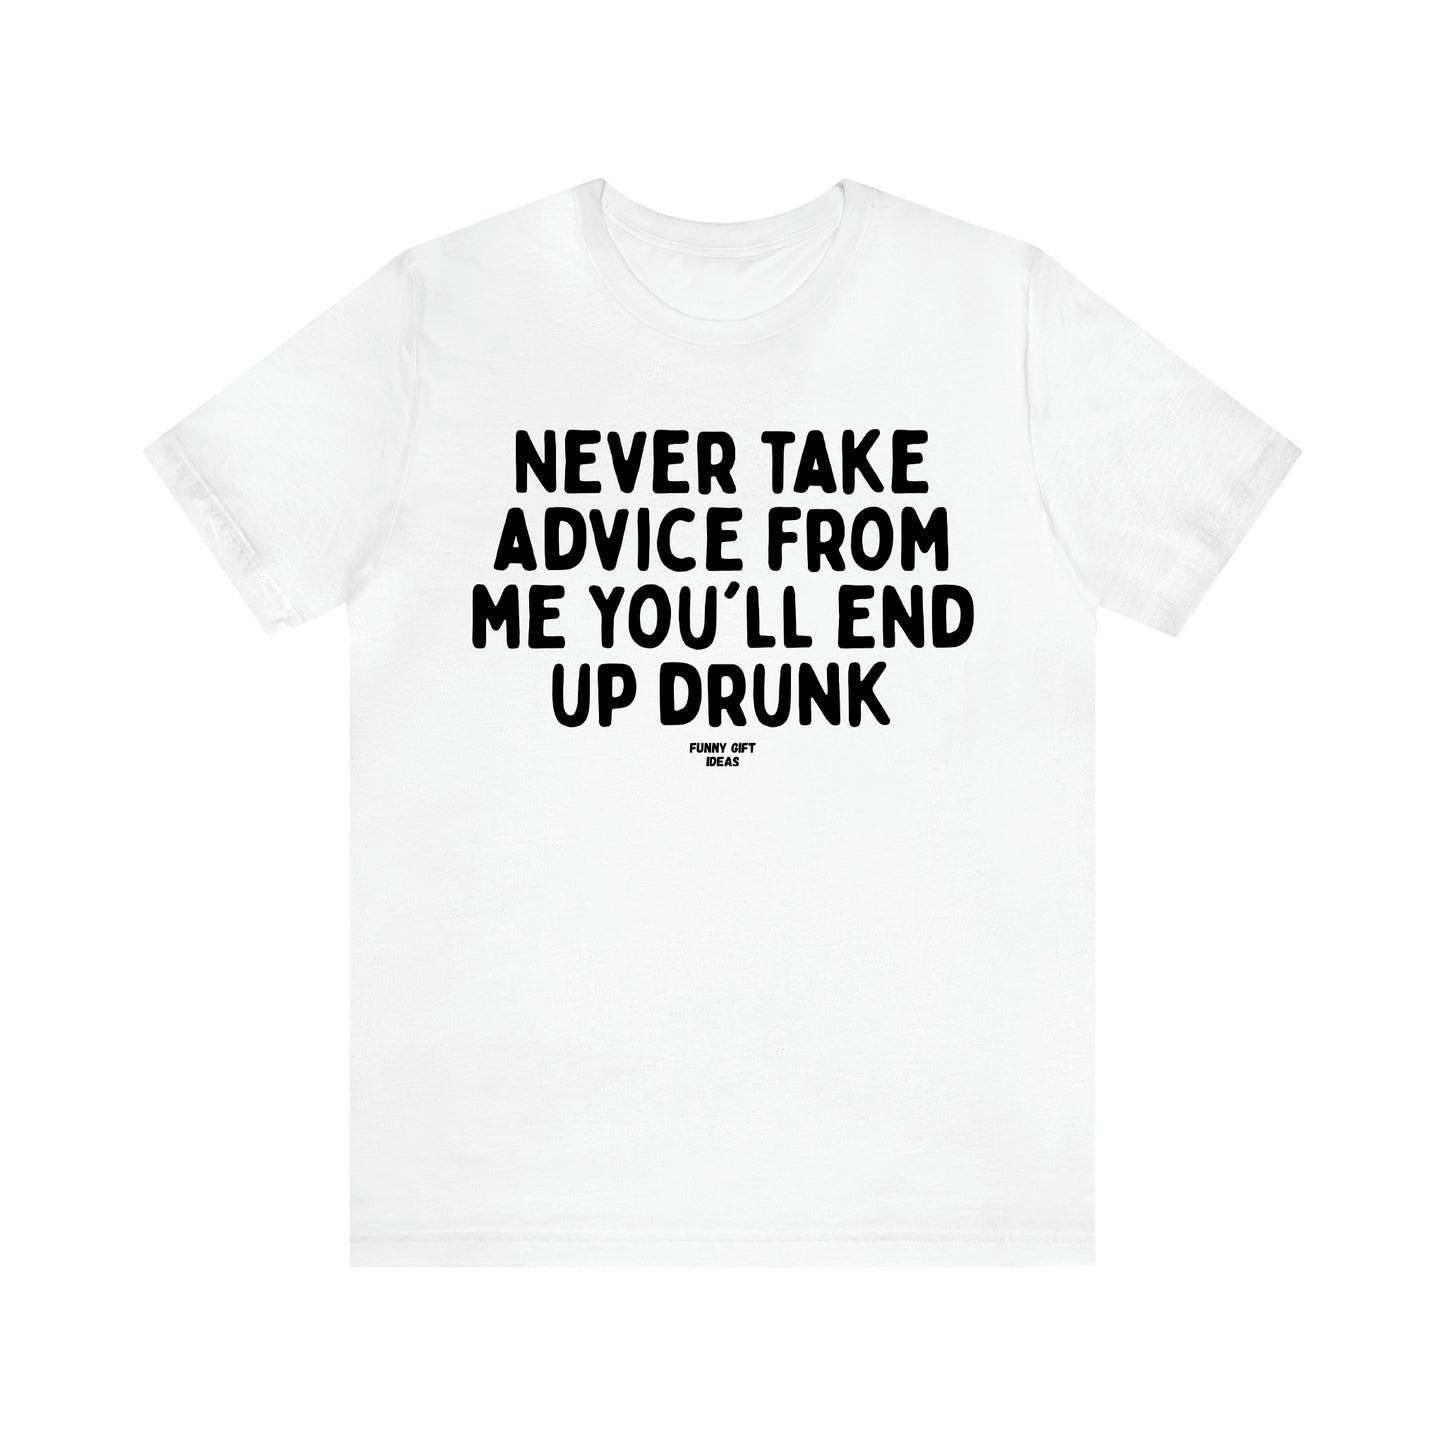 Women's T Shirts Never Take Advice From Me You'll End Up Drunk - Funny Gift Ideas